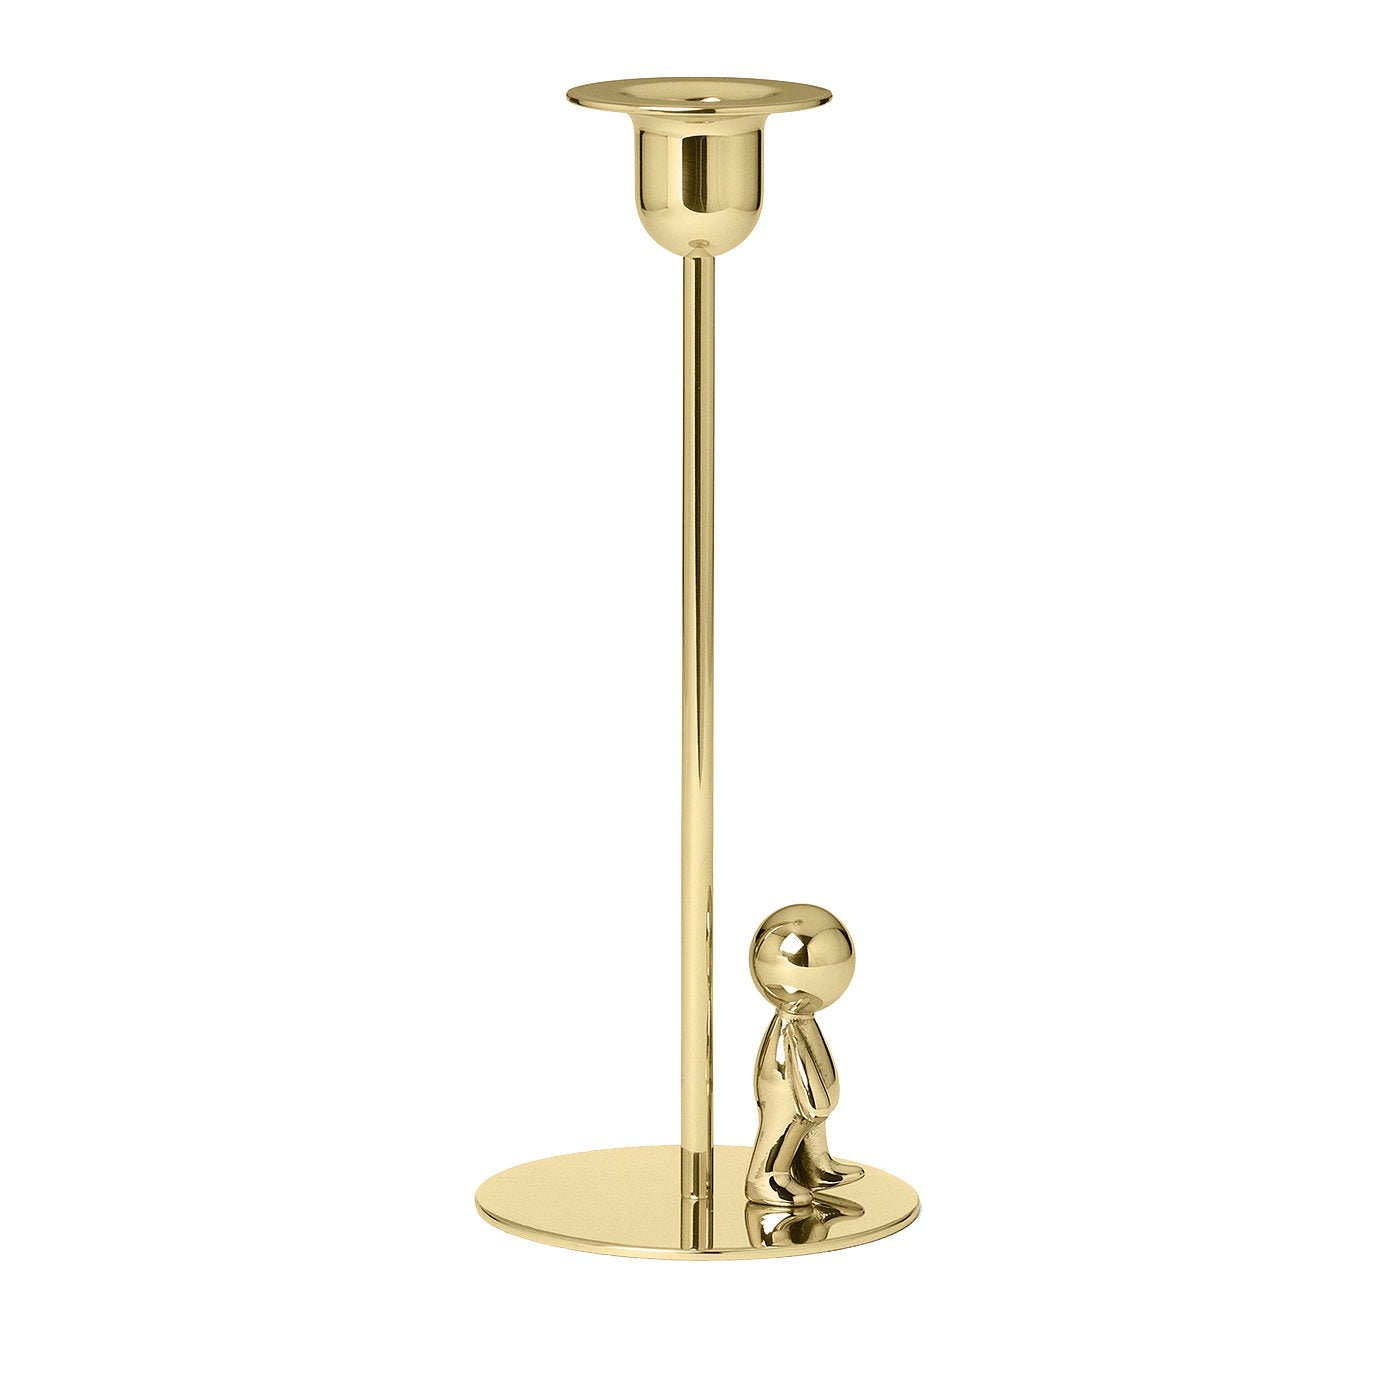 Omini Walkman Tall Candlestick in Polished Brass By Stefano Giovannoni - Main view